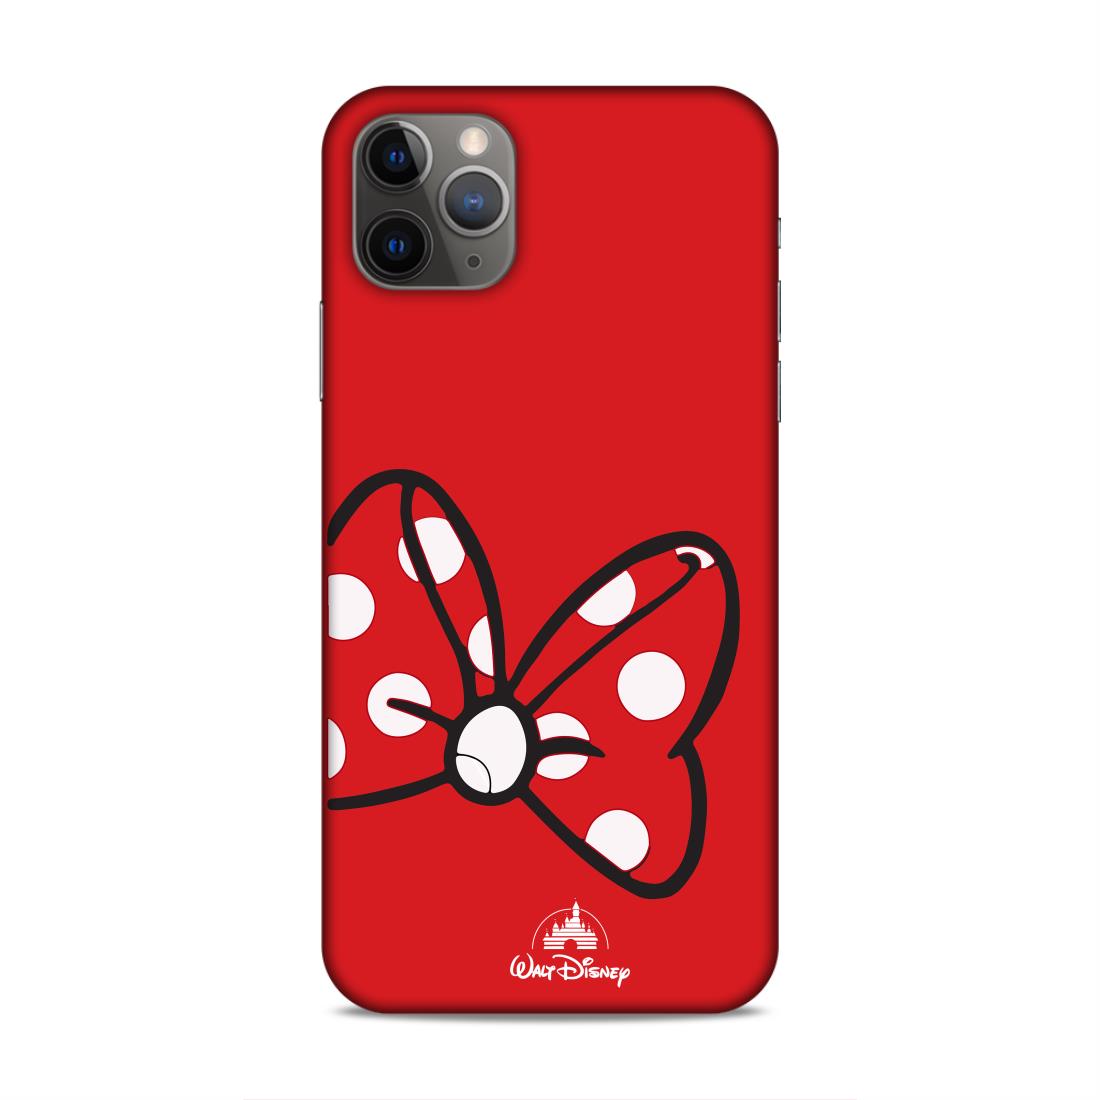 Minnie Polka Dots Hard Back Case For Apple iPhone 11 Pro Max